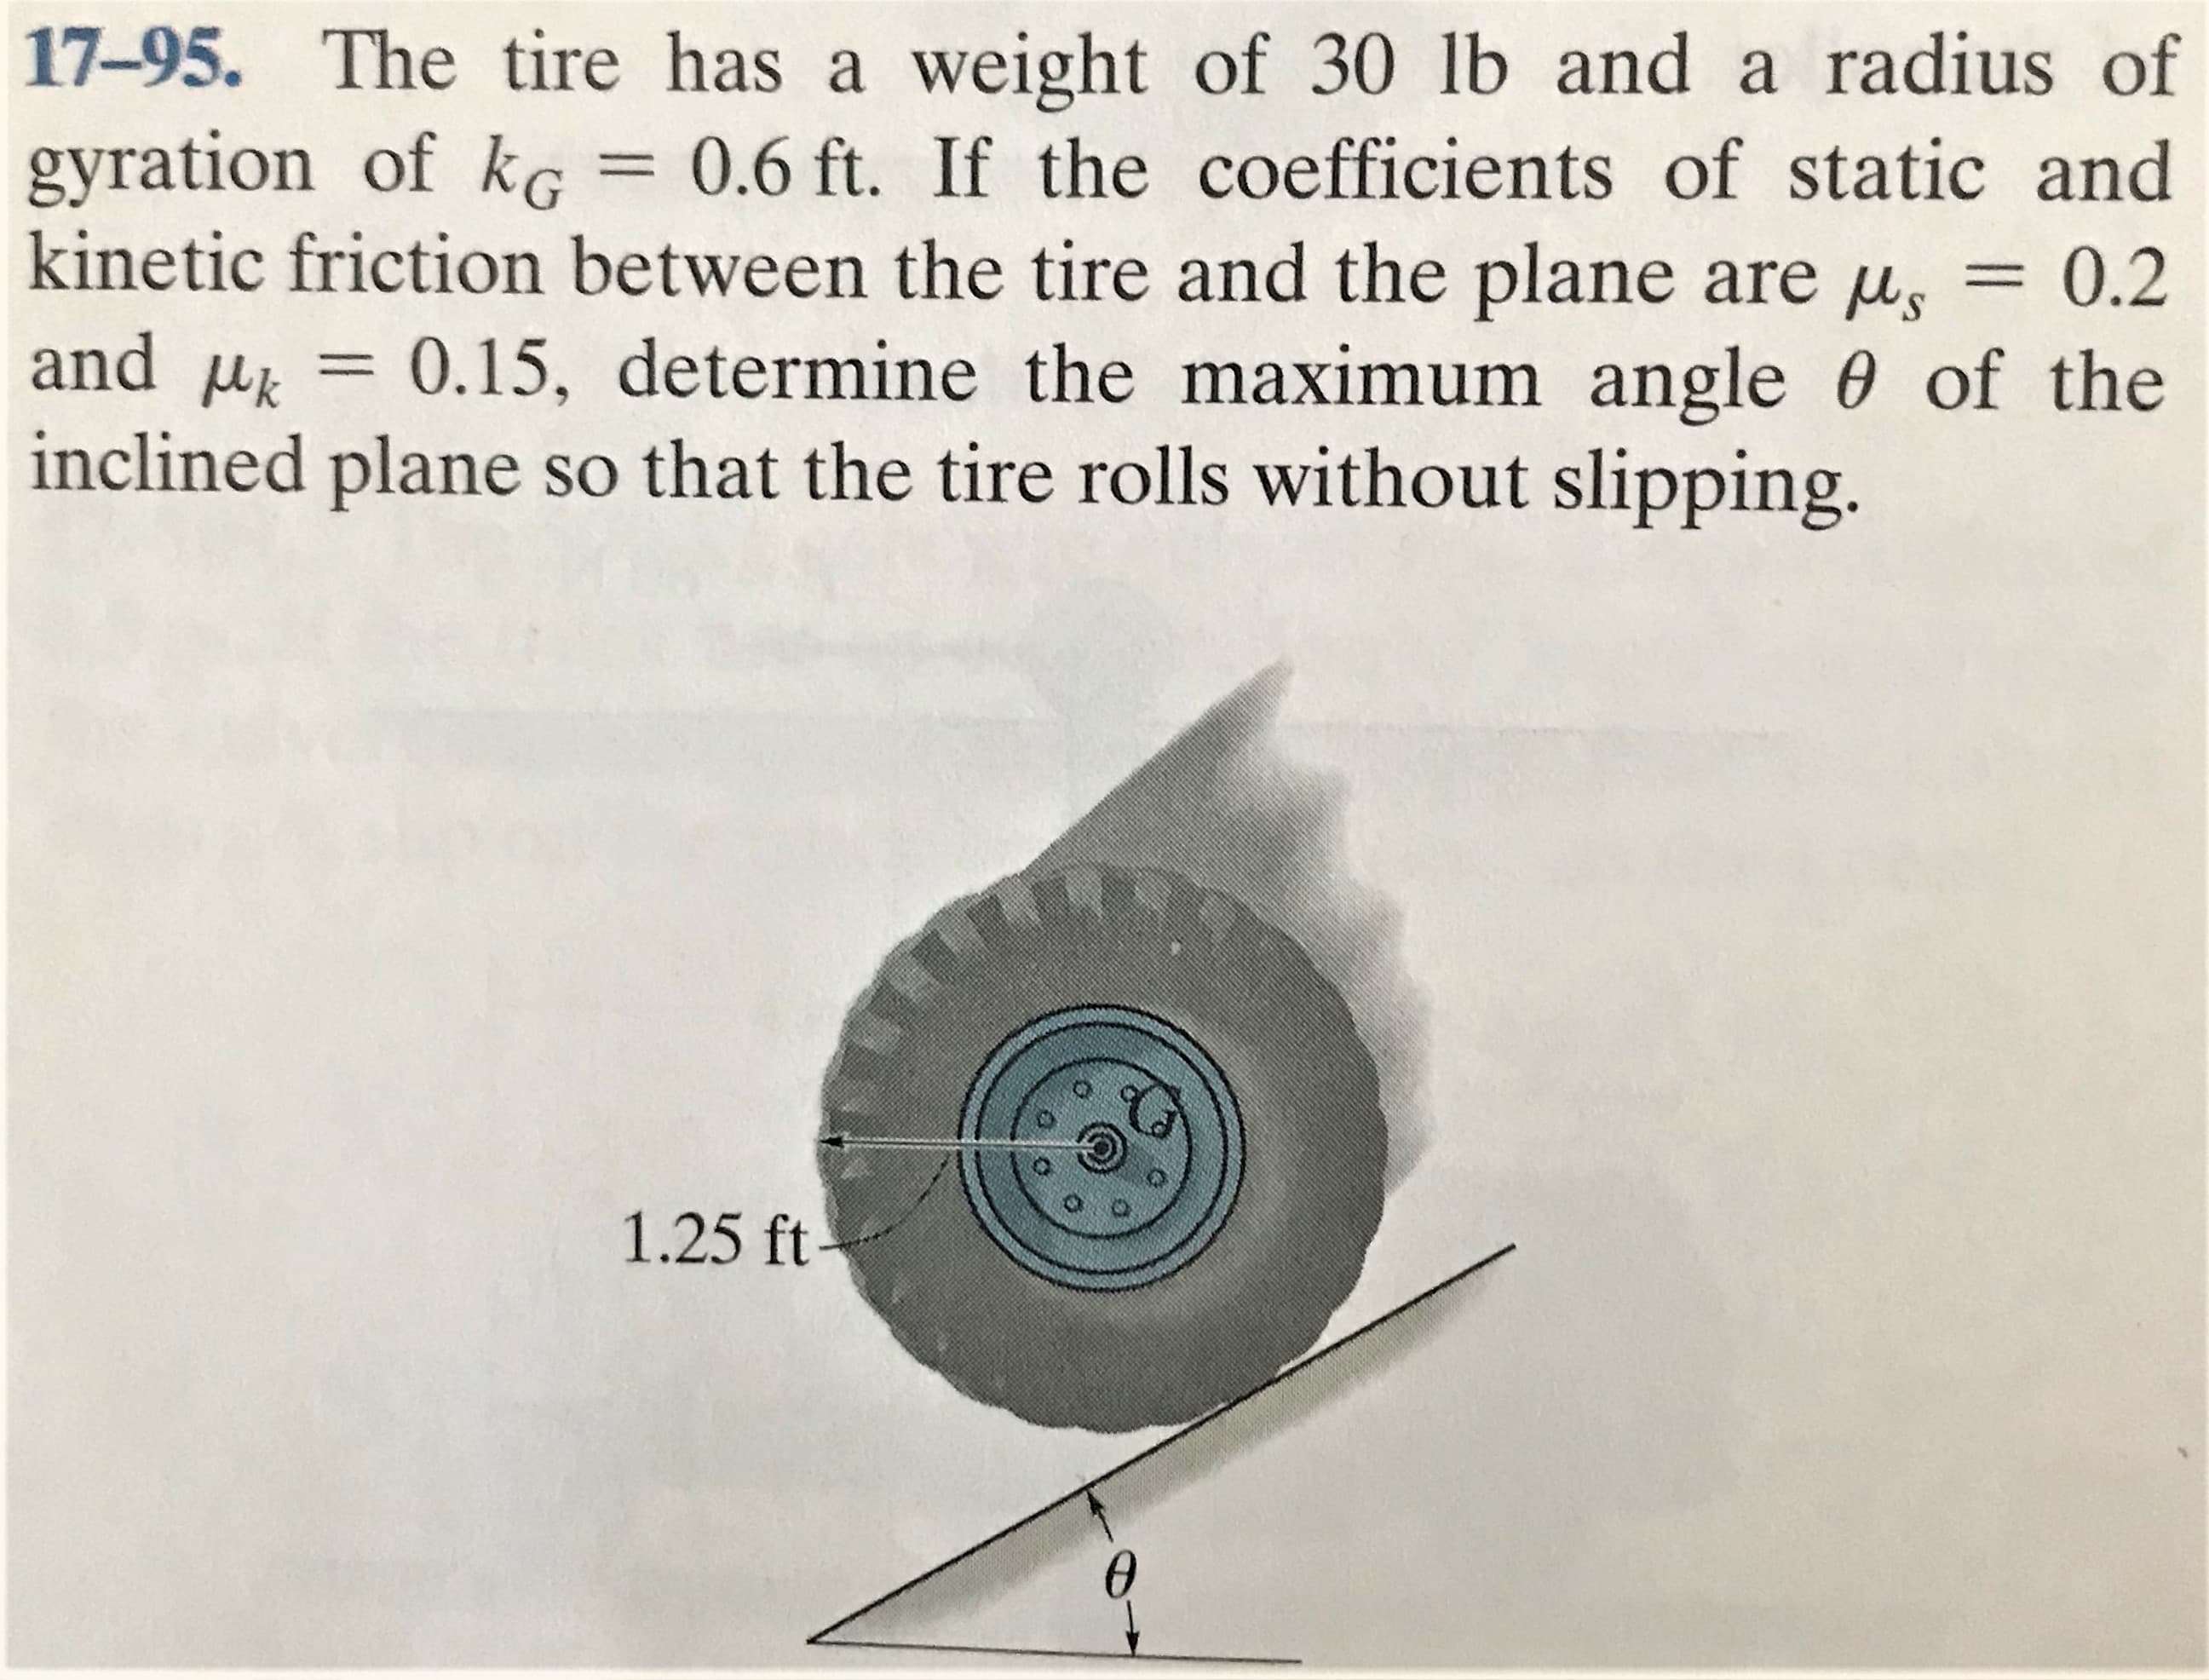 17-95. The tire has a weight of 30 1lb and a radius of
gyration of kG
kinetic friction between the tire and the plane are u, = 0.2
0.6 ft. If the coefficients of static and
and u = 0.15, determine the maximum angle 0 of the
inclined plane so that the tire rolls without slipping.
%3D
1.25 ft-
